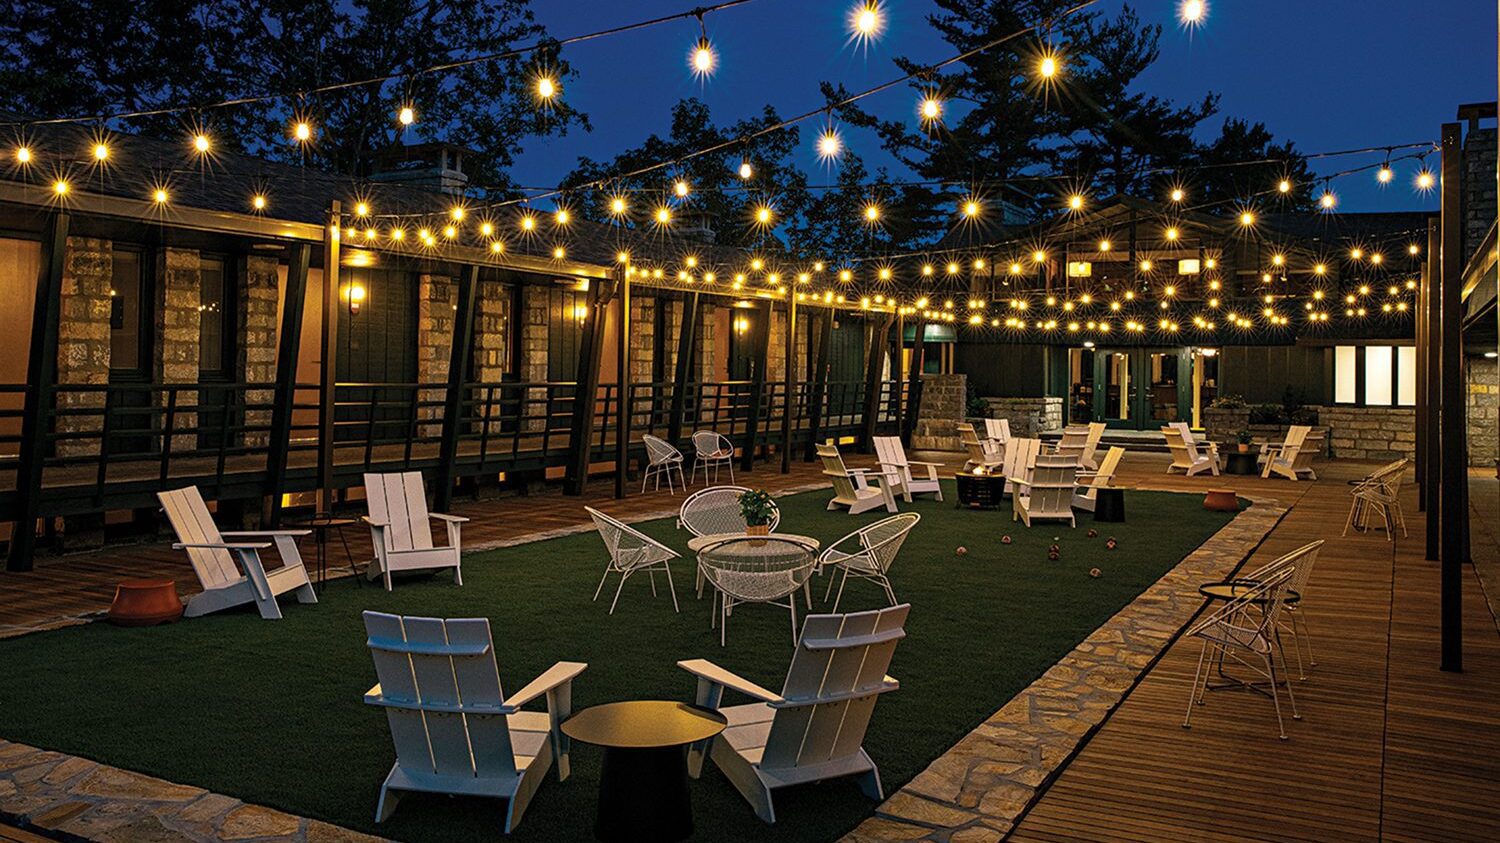 The patio at Skyline Lodge in Highlands, N.C., with string lights at night.